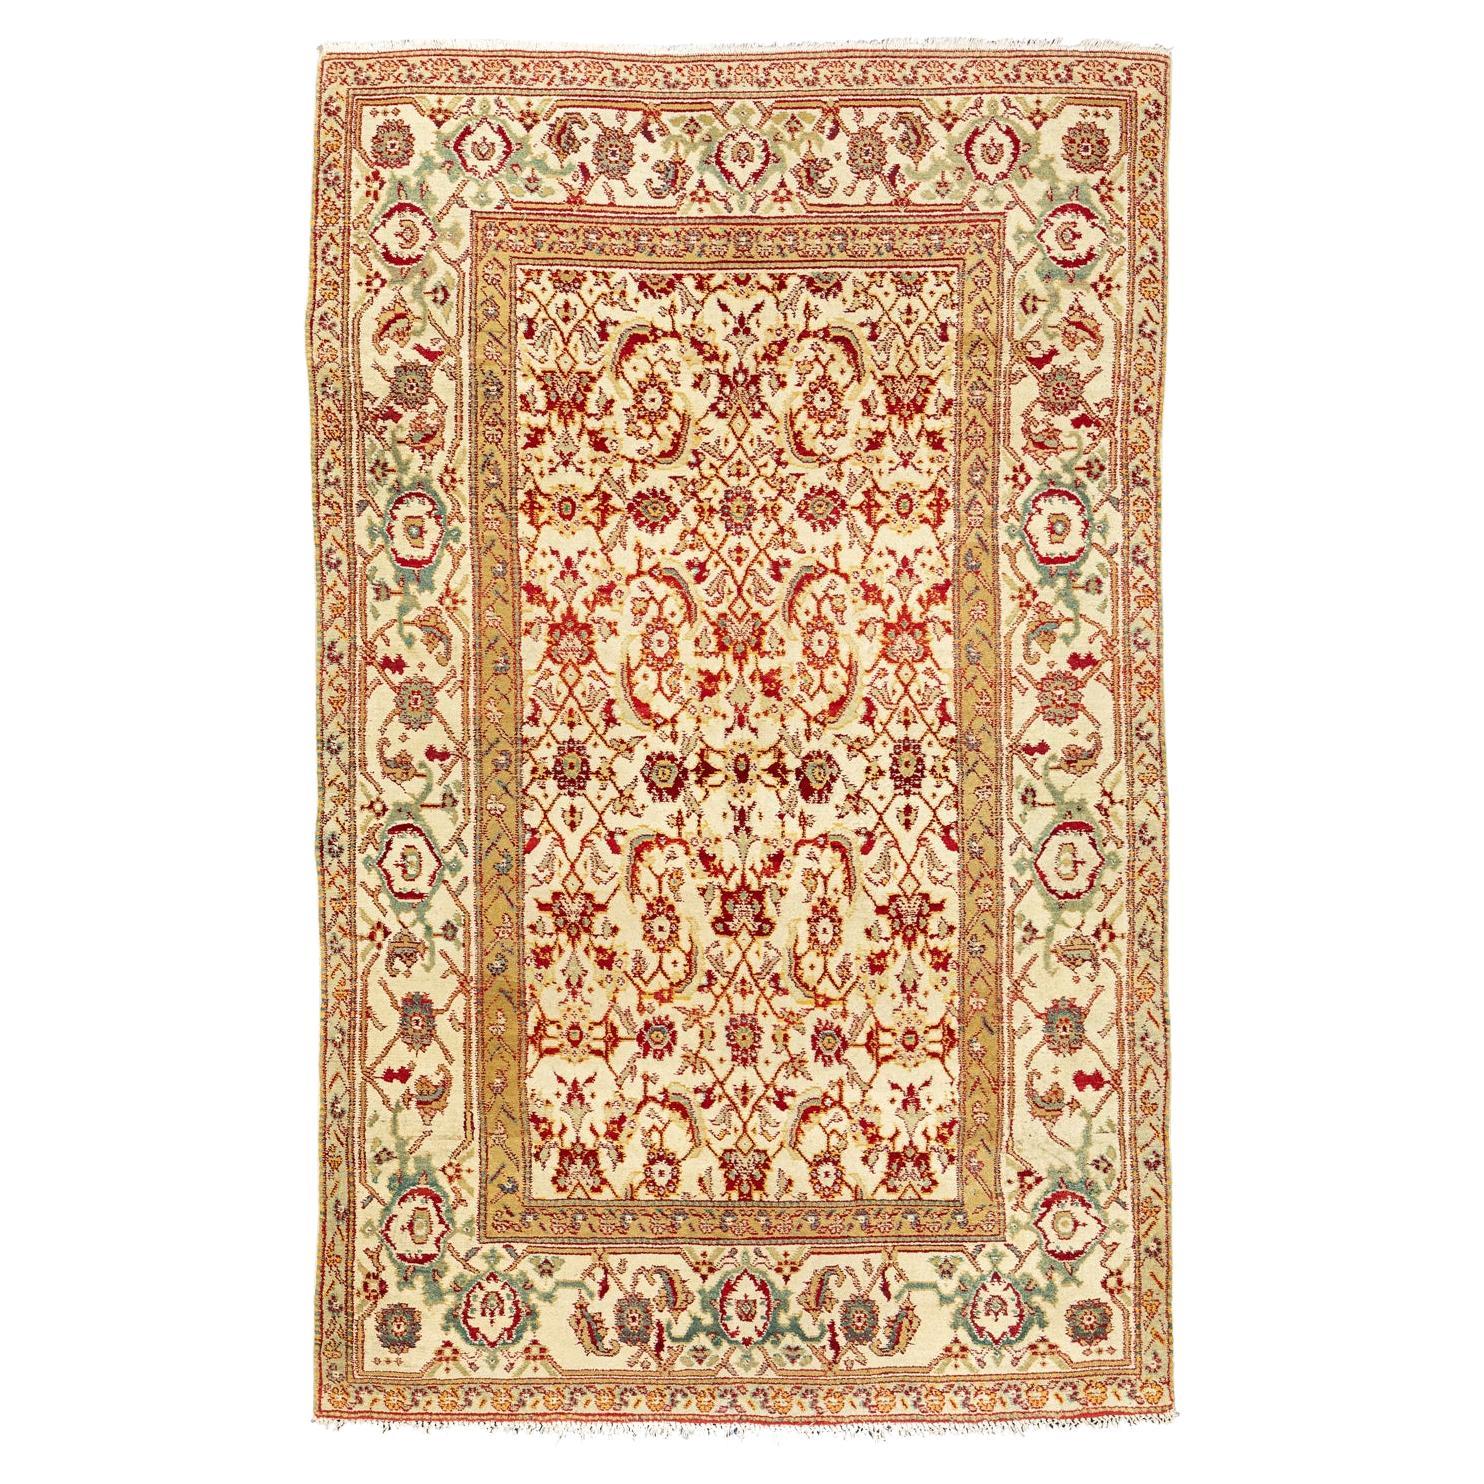 Indian Agra Fish Design Antique Rug Ivory Field Floral All-over For Sale